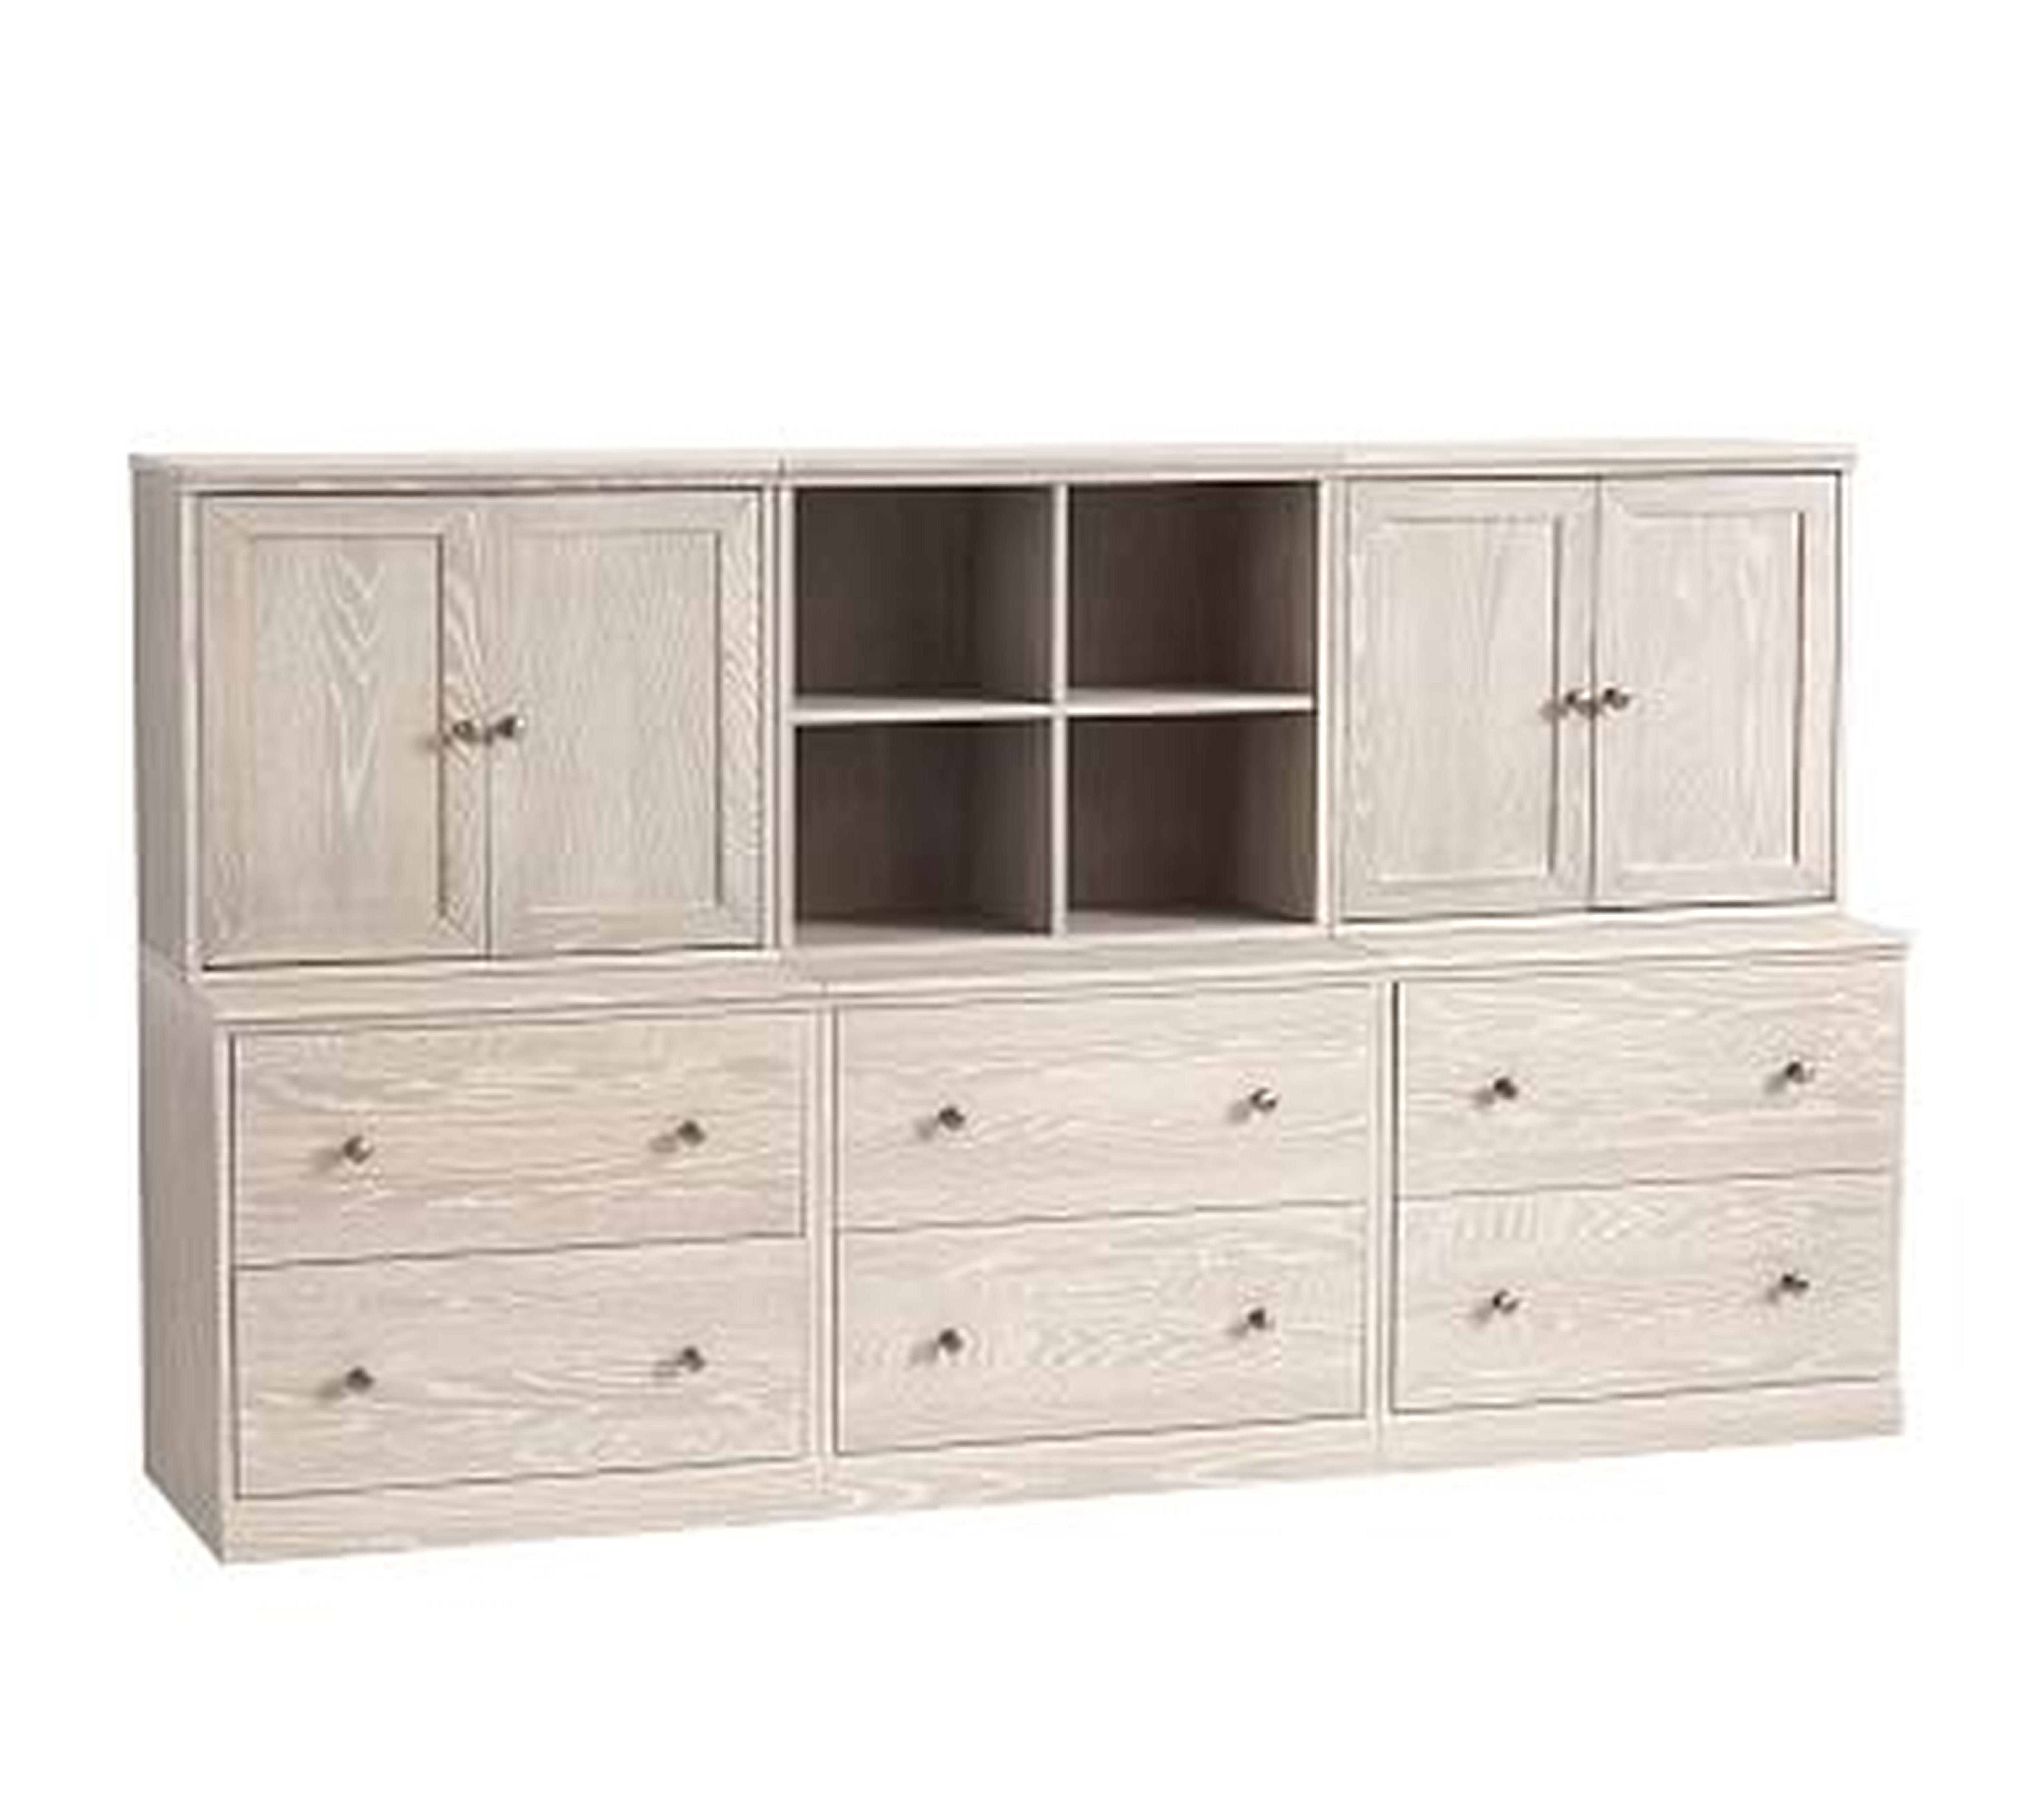 Cameron 1 Cubby, 2 Cabinets, &amp; 3 Double Drawer Base Set, Heritage Fog, Flat Rate - Pottery Barn Kids